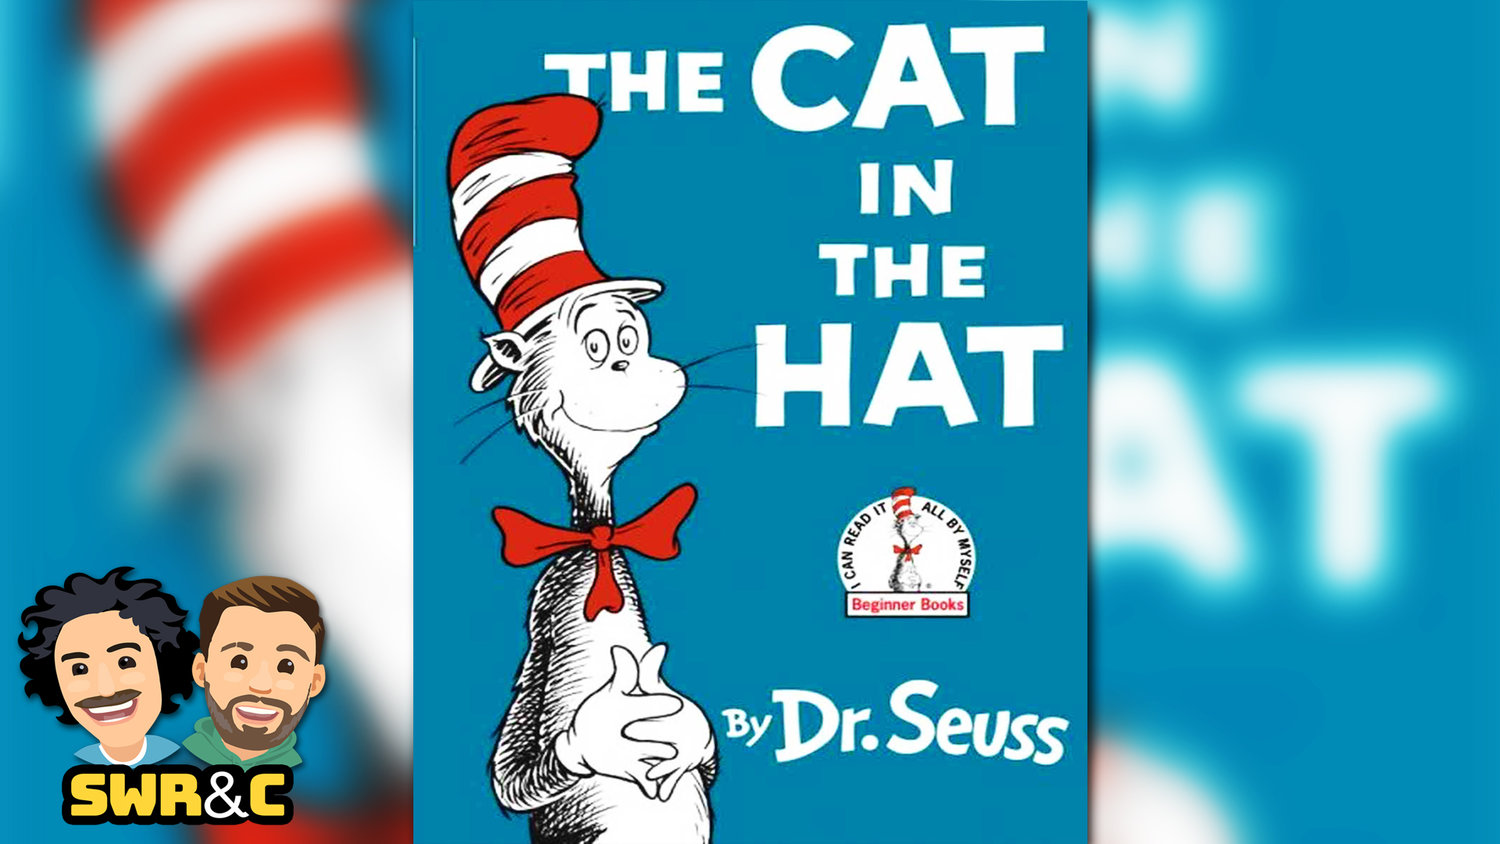 The Cat in the Hat by Dr. Seuss - STORYTIME WITH RYAN & CRAIG.